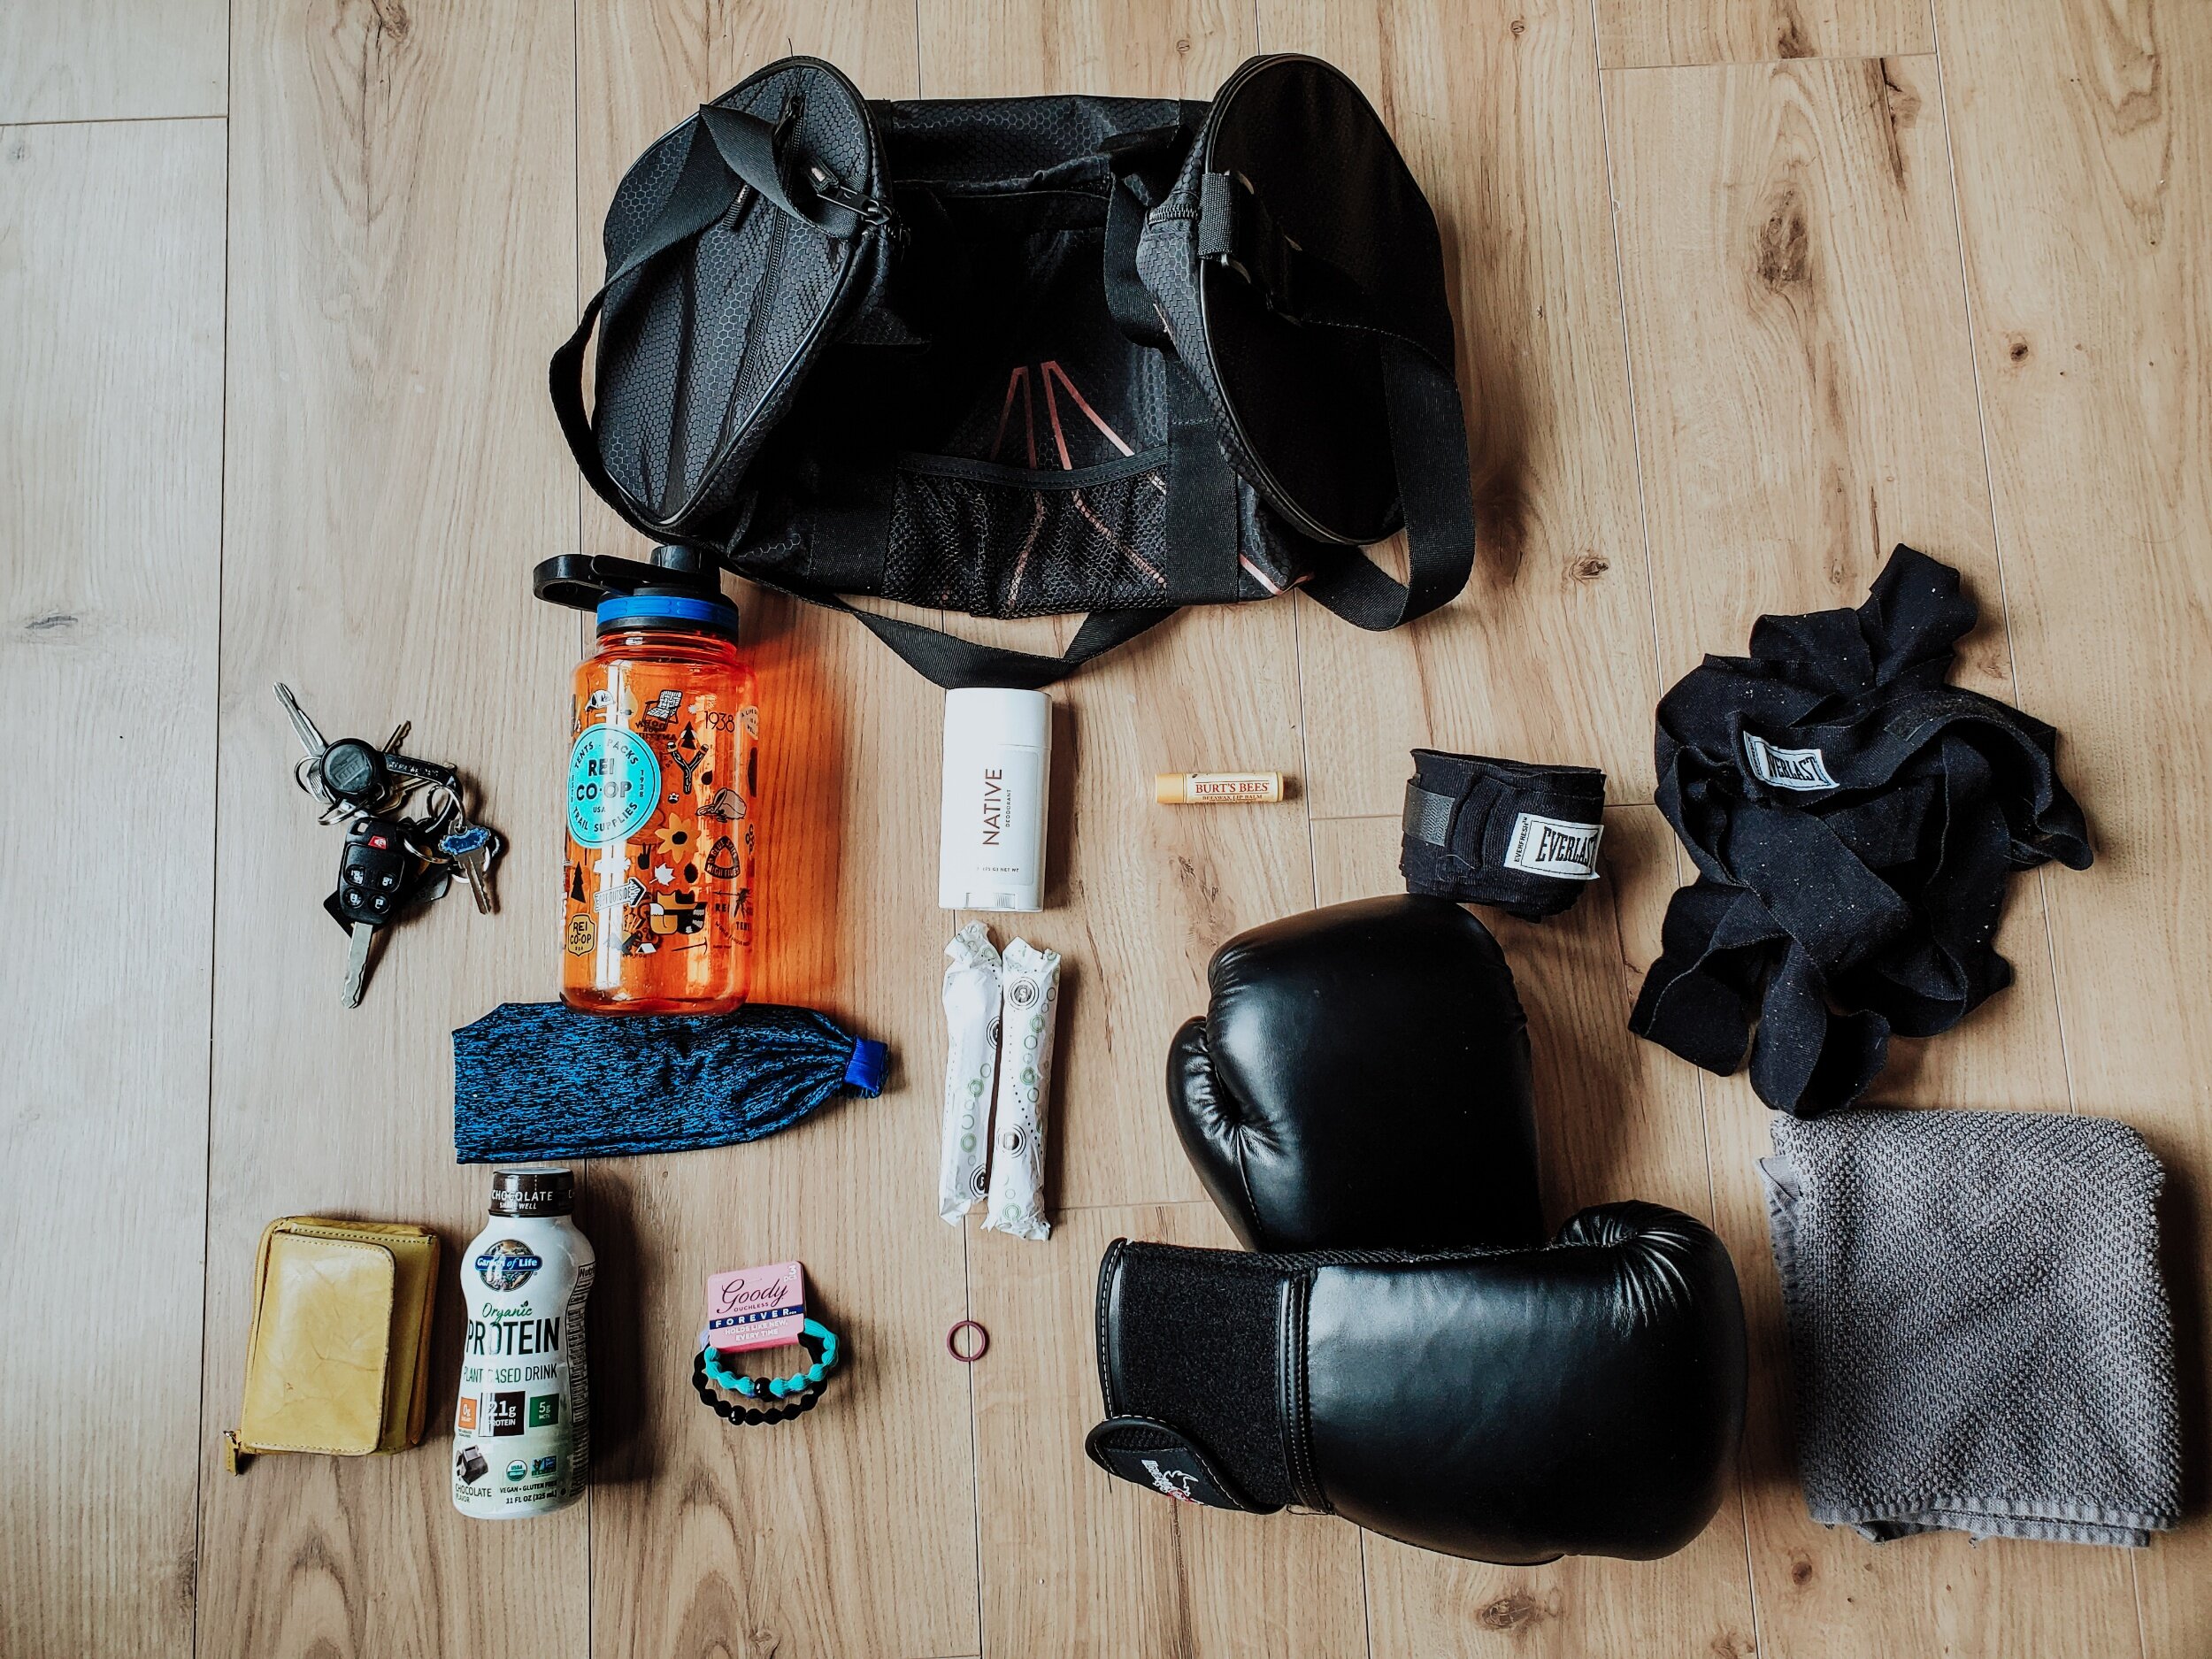 What's in My Gym Bag